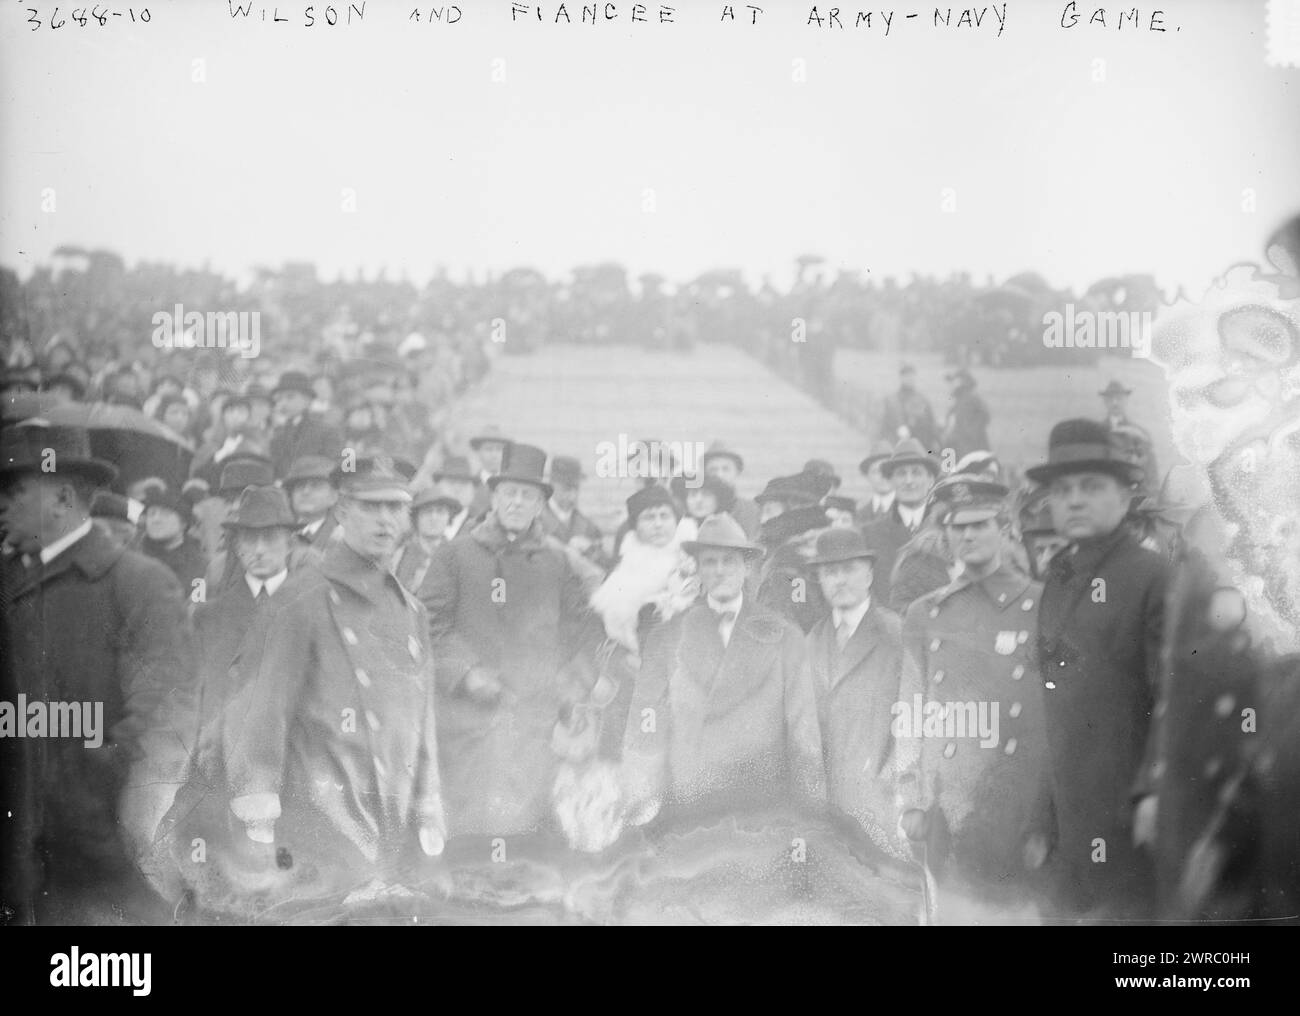 Wilson and fiancee at Army - Navy game, Photograph shows spectators including President Woodrow Wilson and his fiancee Edith Bolling Galt at the Army-Navy football game played at the Polo Grounds in New York City in 1915., 1915 Nov. 27, Glass negatives, 1 negative: glass Stock Photo